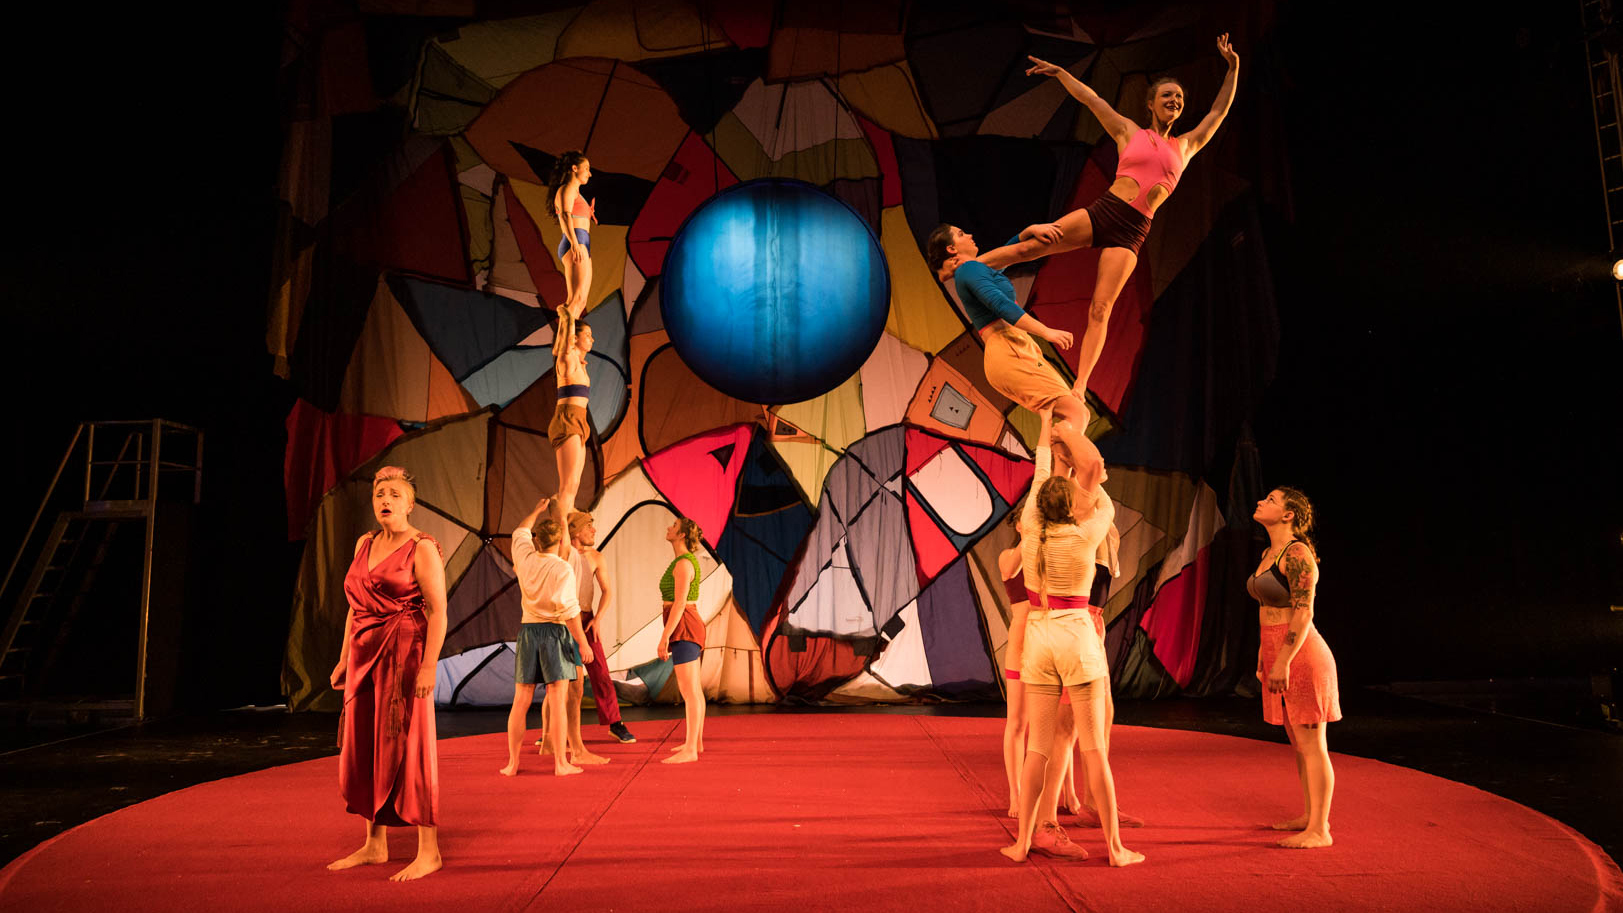 Acrobats perform on a stage wearing colourful clothing